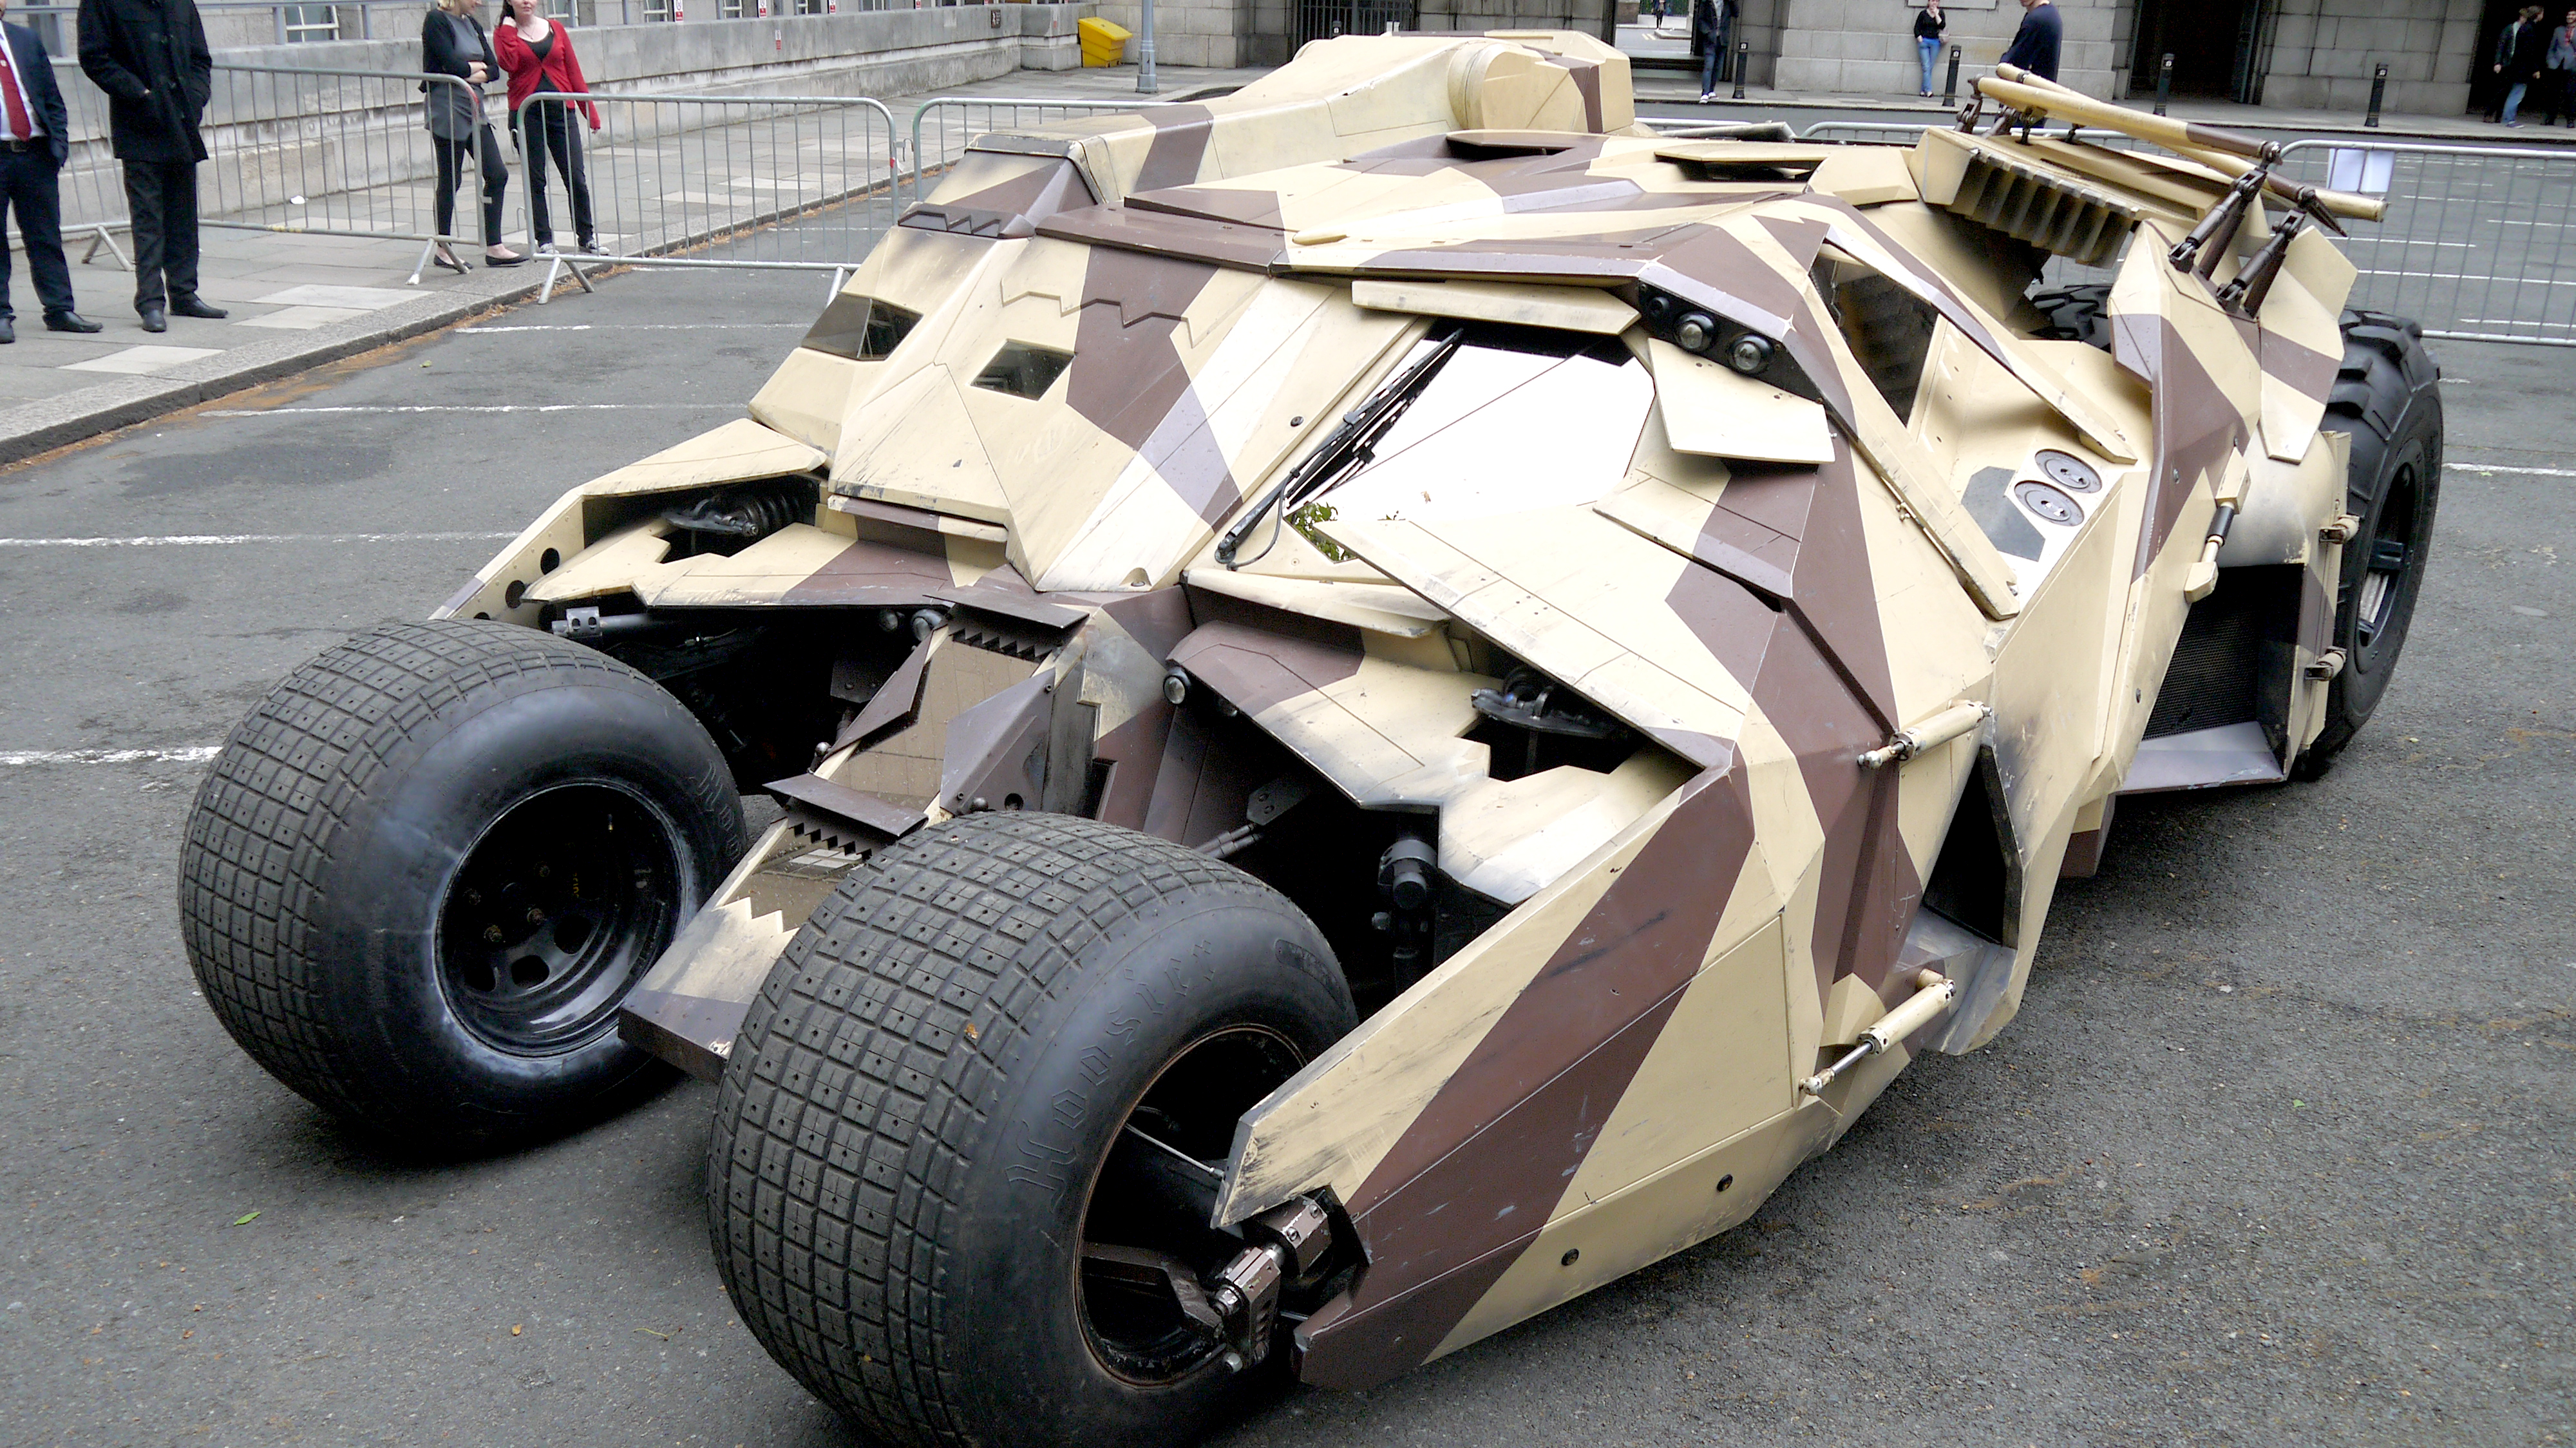 The technology of the Tumbler - how Britain made the Dark Knight mobile